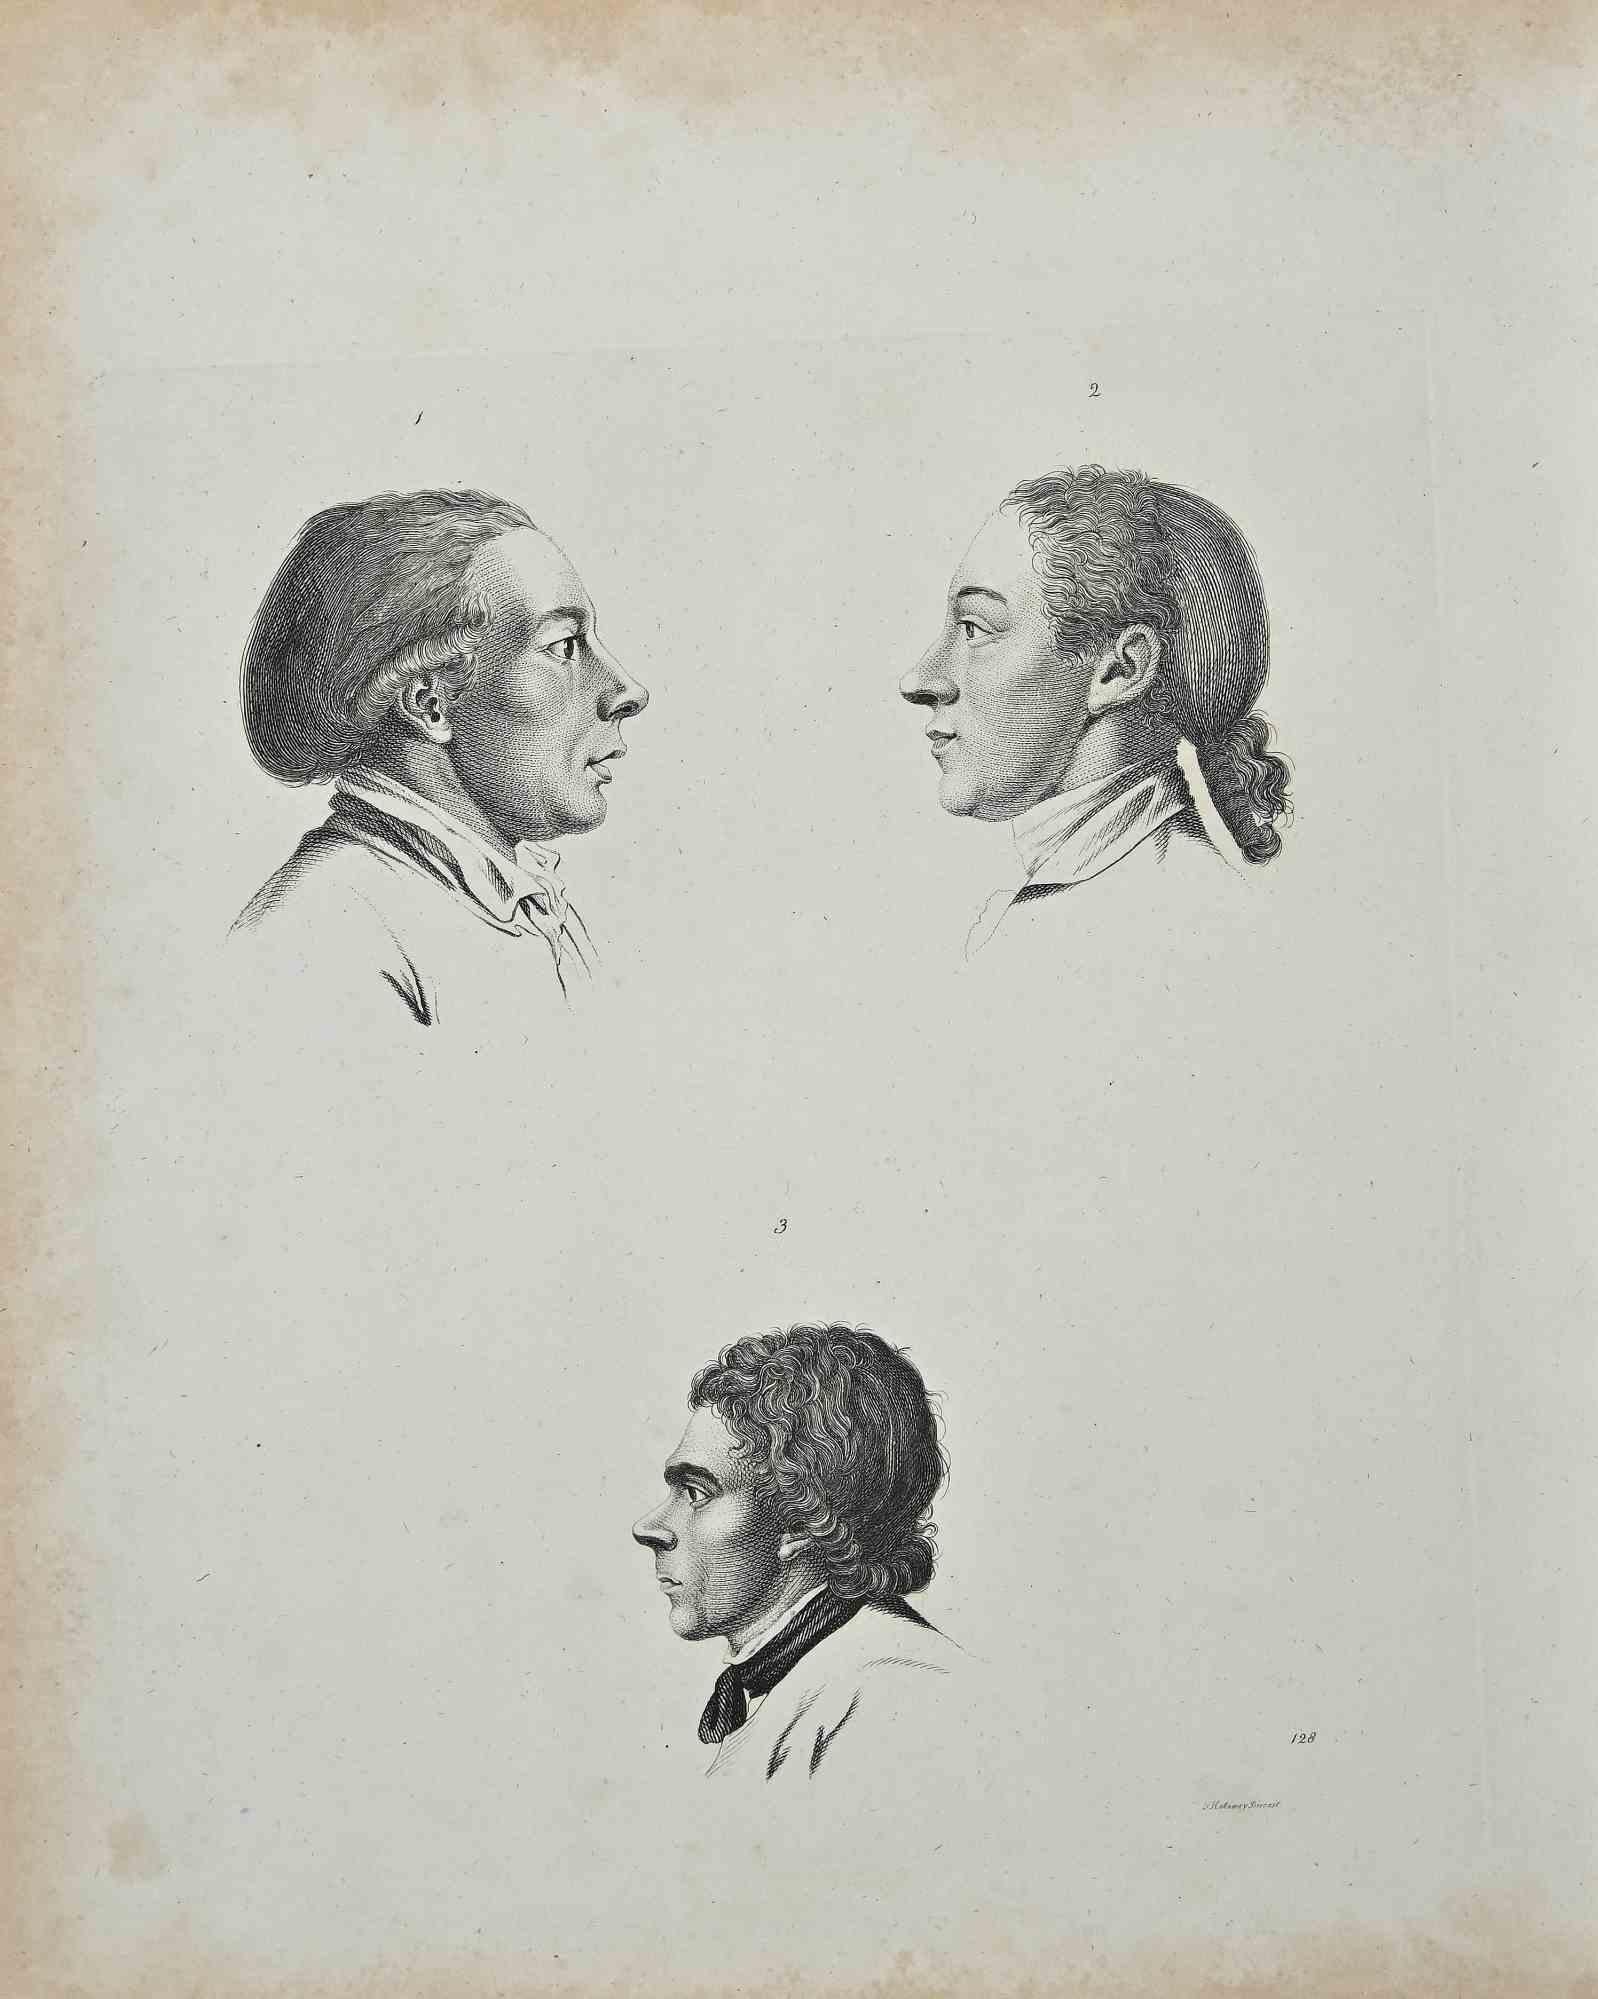 The Profiles of Noblemen is an original etching artwork realized by Thomas Holloway for Johann Caspar Lavater's "Essays on Physiognomy, Designed to Promote the Knowledge and the Love of Mankind", London, Bensley, 1810. 

Good conditions with some